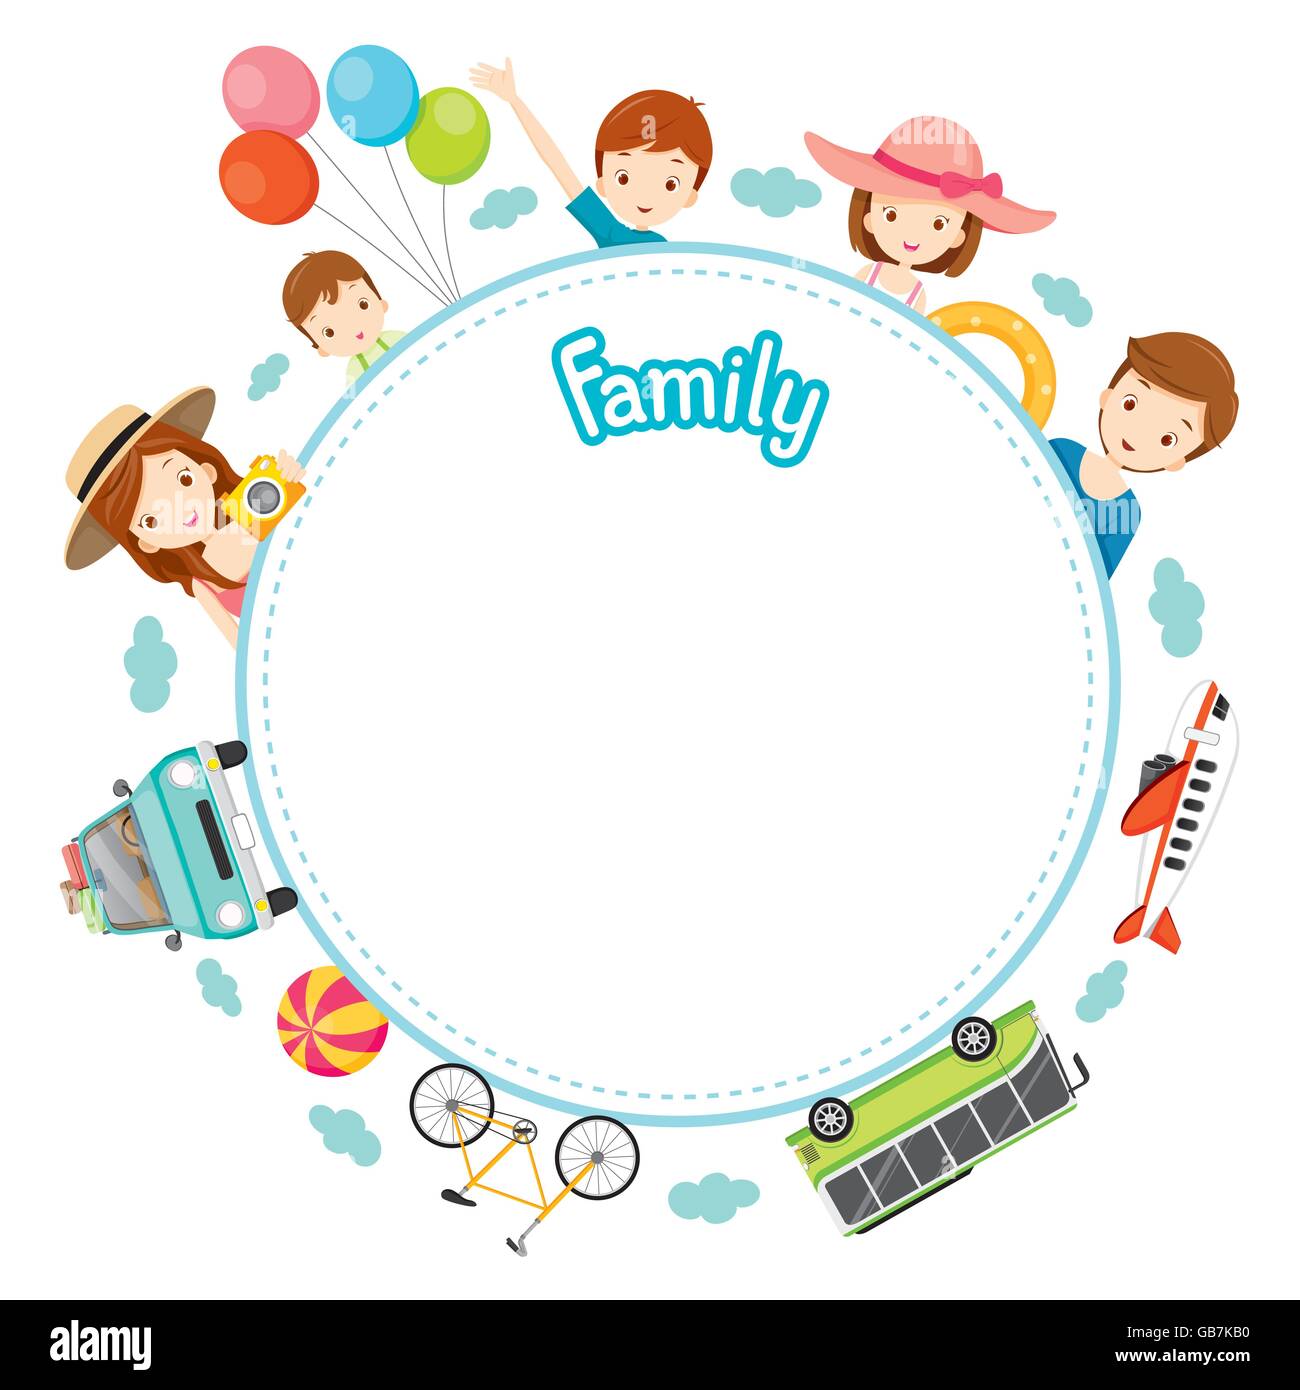 Family Vacation Objects on Round Frame, Vacations, Holiday, Travel Destination, Journey Trips, Transportation Stock Vector